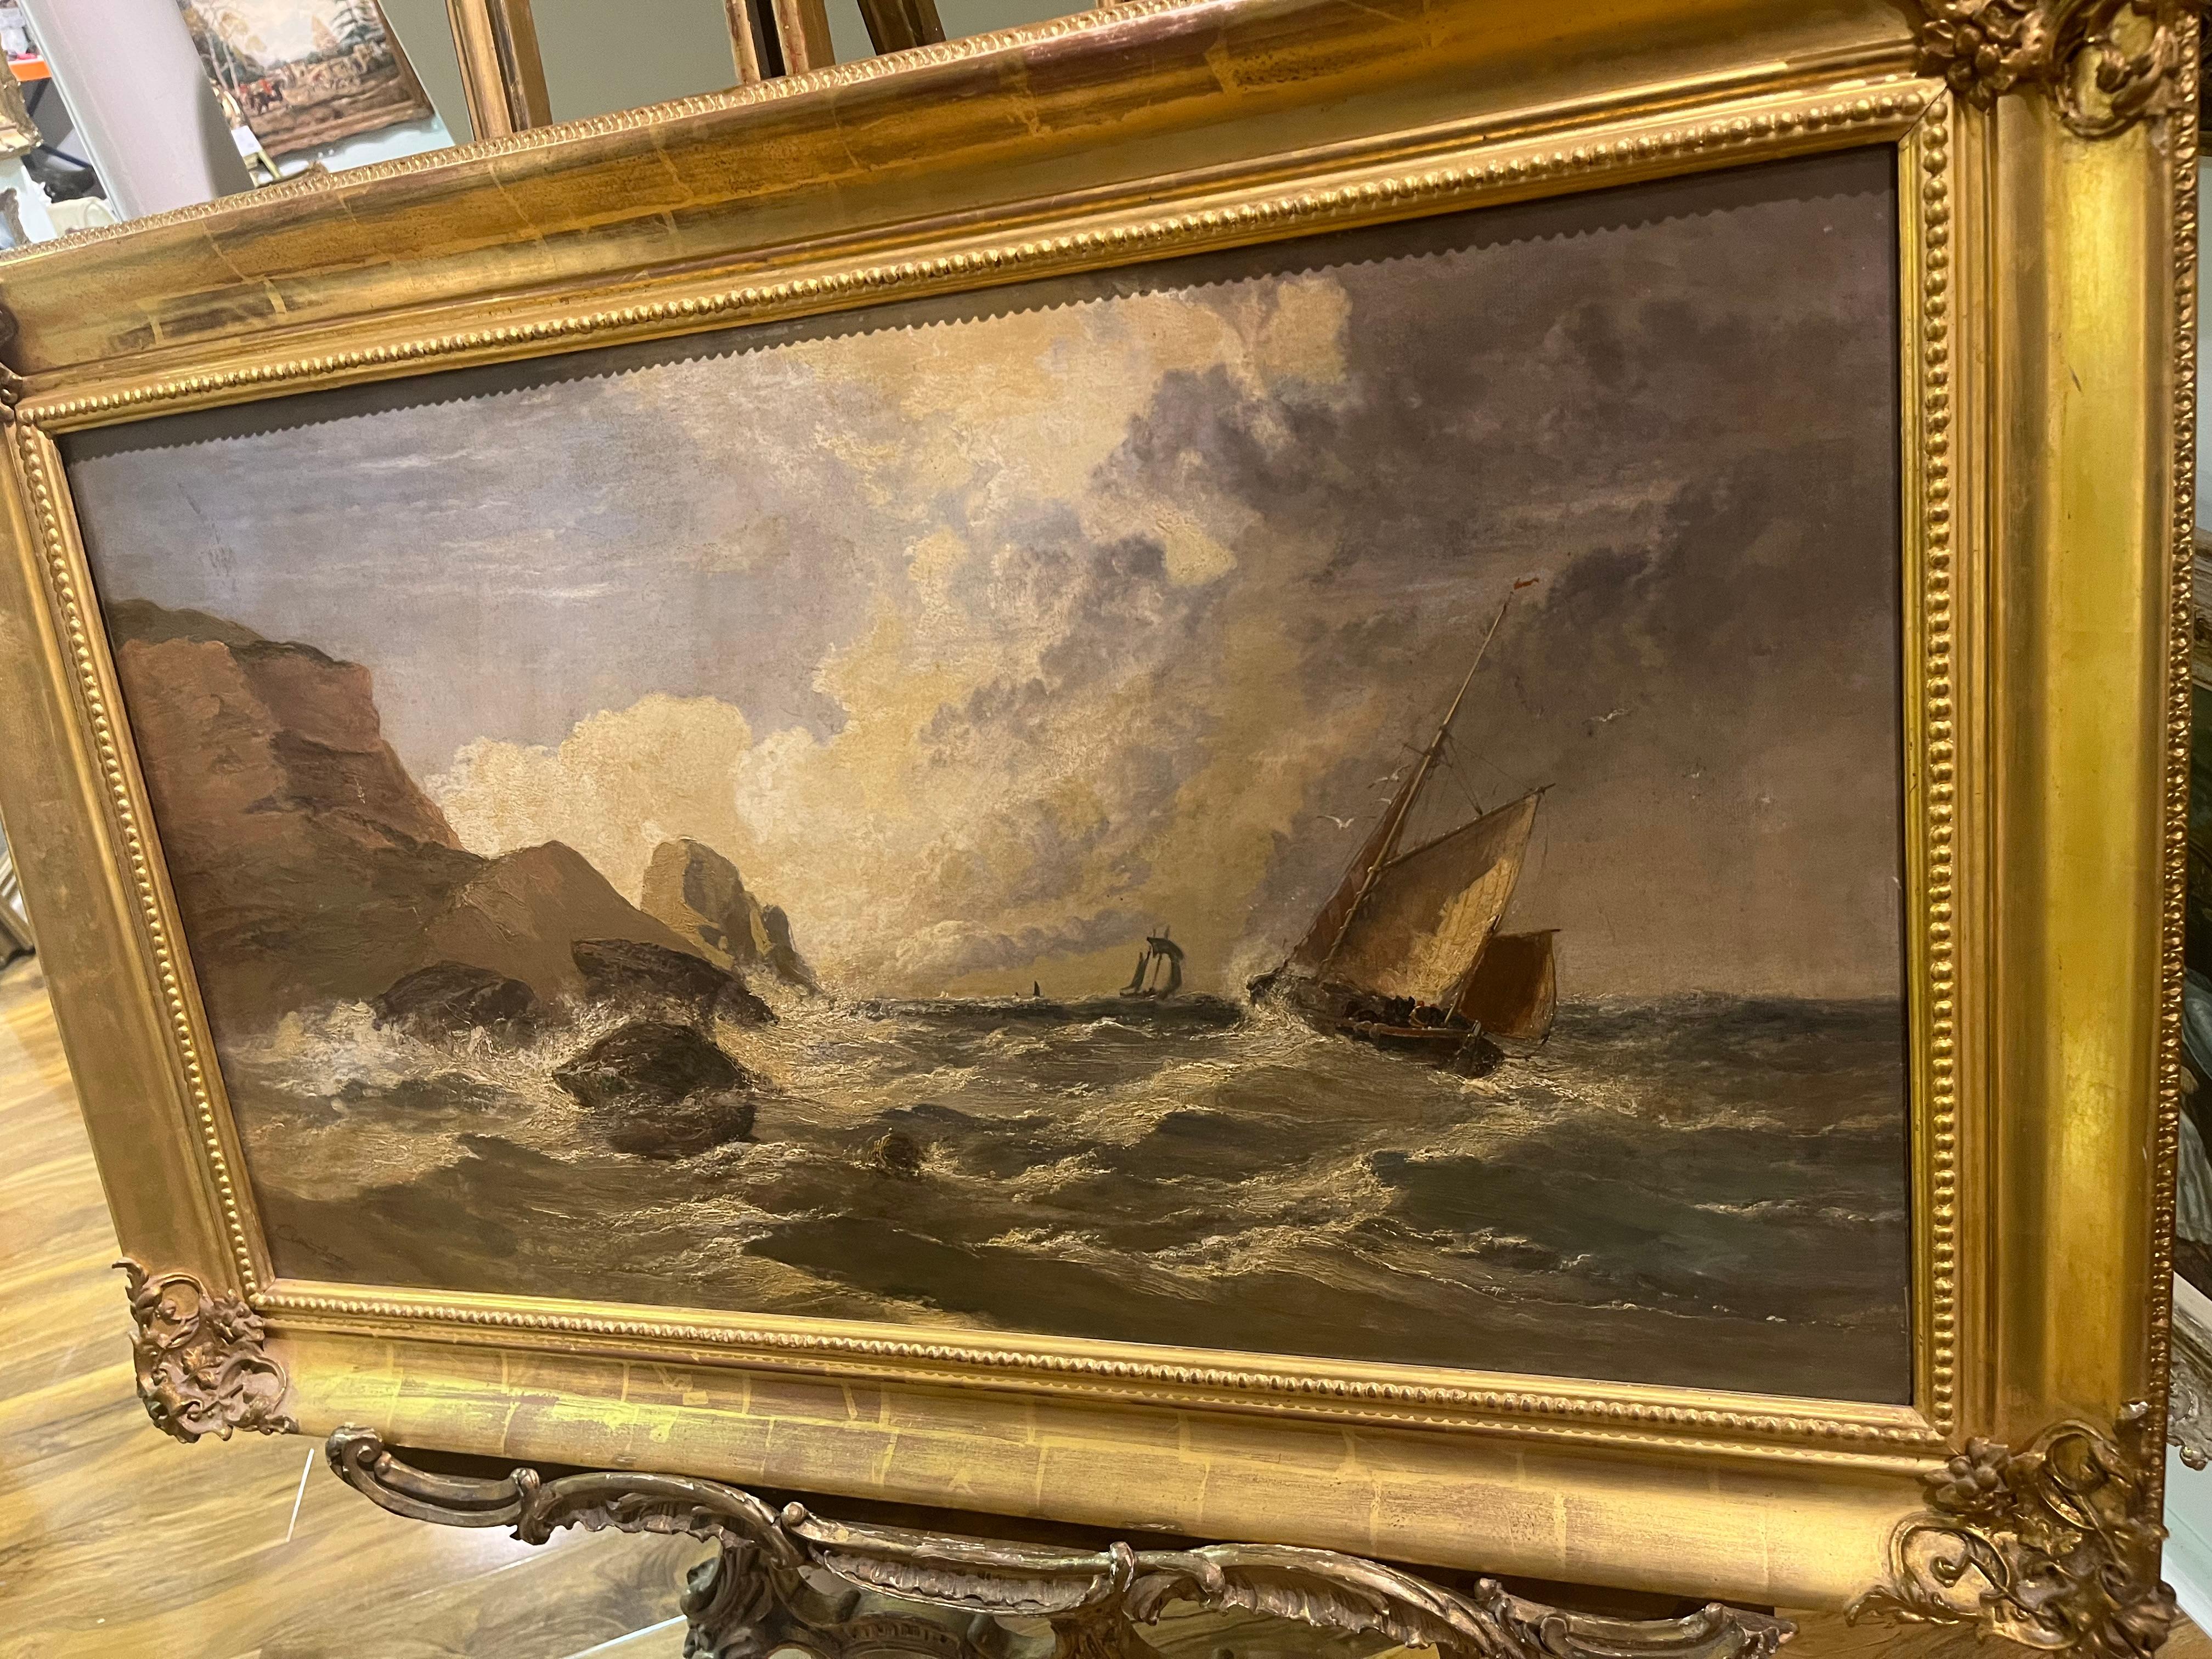 OIL PAINTING OLD MASTER ARTHUR MEADOWS (1843 - 1907) FINE 19th CENTURY BRITISH

Original Antique Large late 19th/early 20th Century British OLD MASTER OIL PAINTING Romantic Sea Scene GOLD GILT FRAME

NEW COLLECTION Of RARE PIECES OF ENGLISH